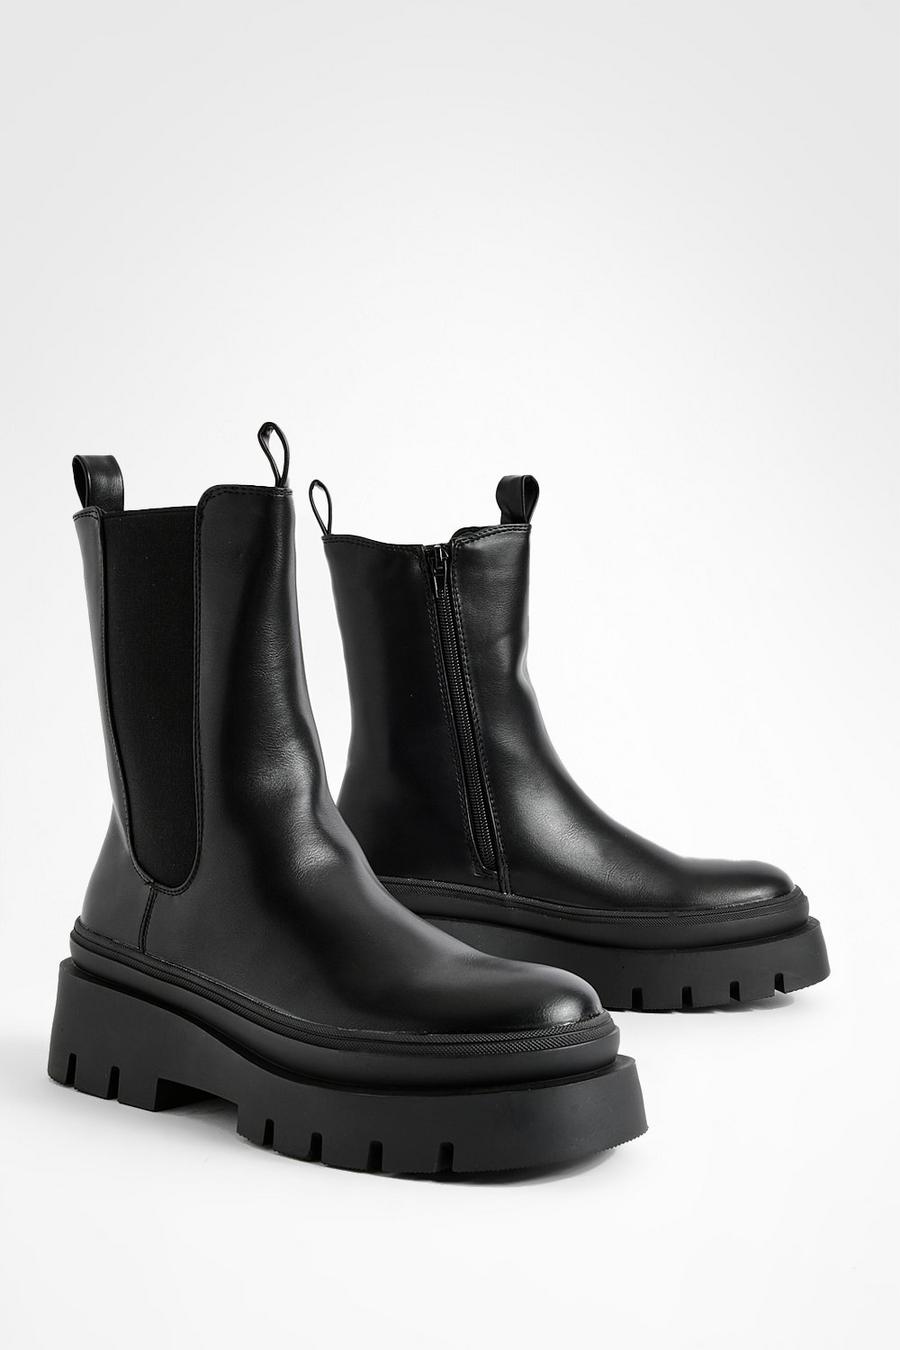 Black Double Sole Calf Height Chunky Chelsea Boots